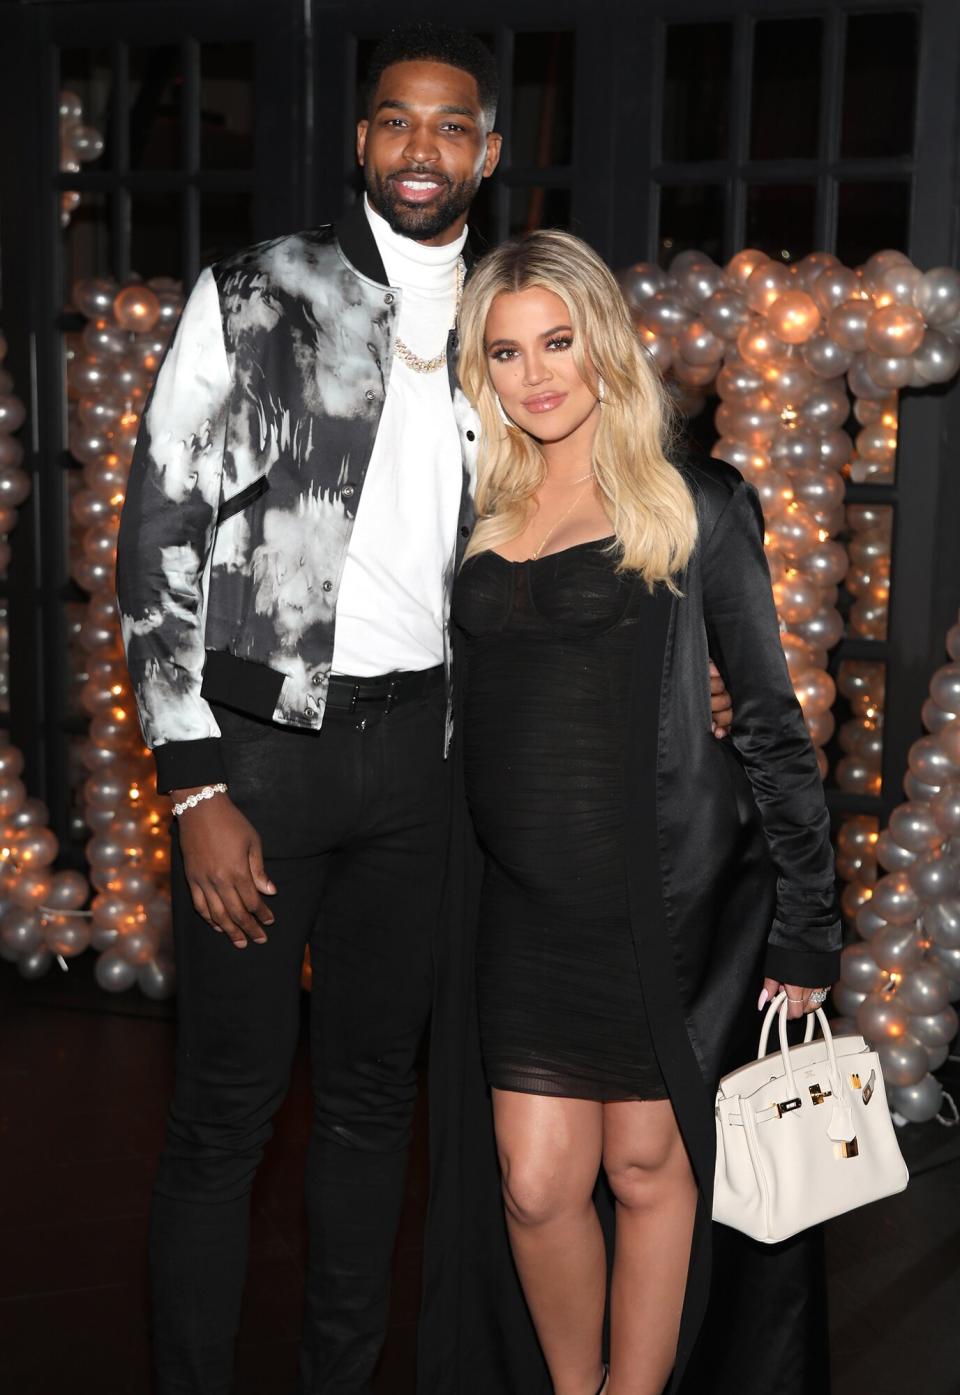 Tristan Thompson and Khloe Kardashian pose for a photo as Remy Martin celebrates Tristan Thompson's Birthday at Beauty & Essex on March 10, 2018 in Los Angeles, California